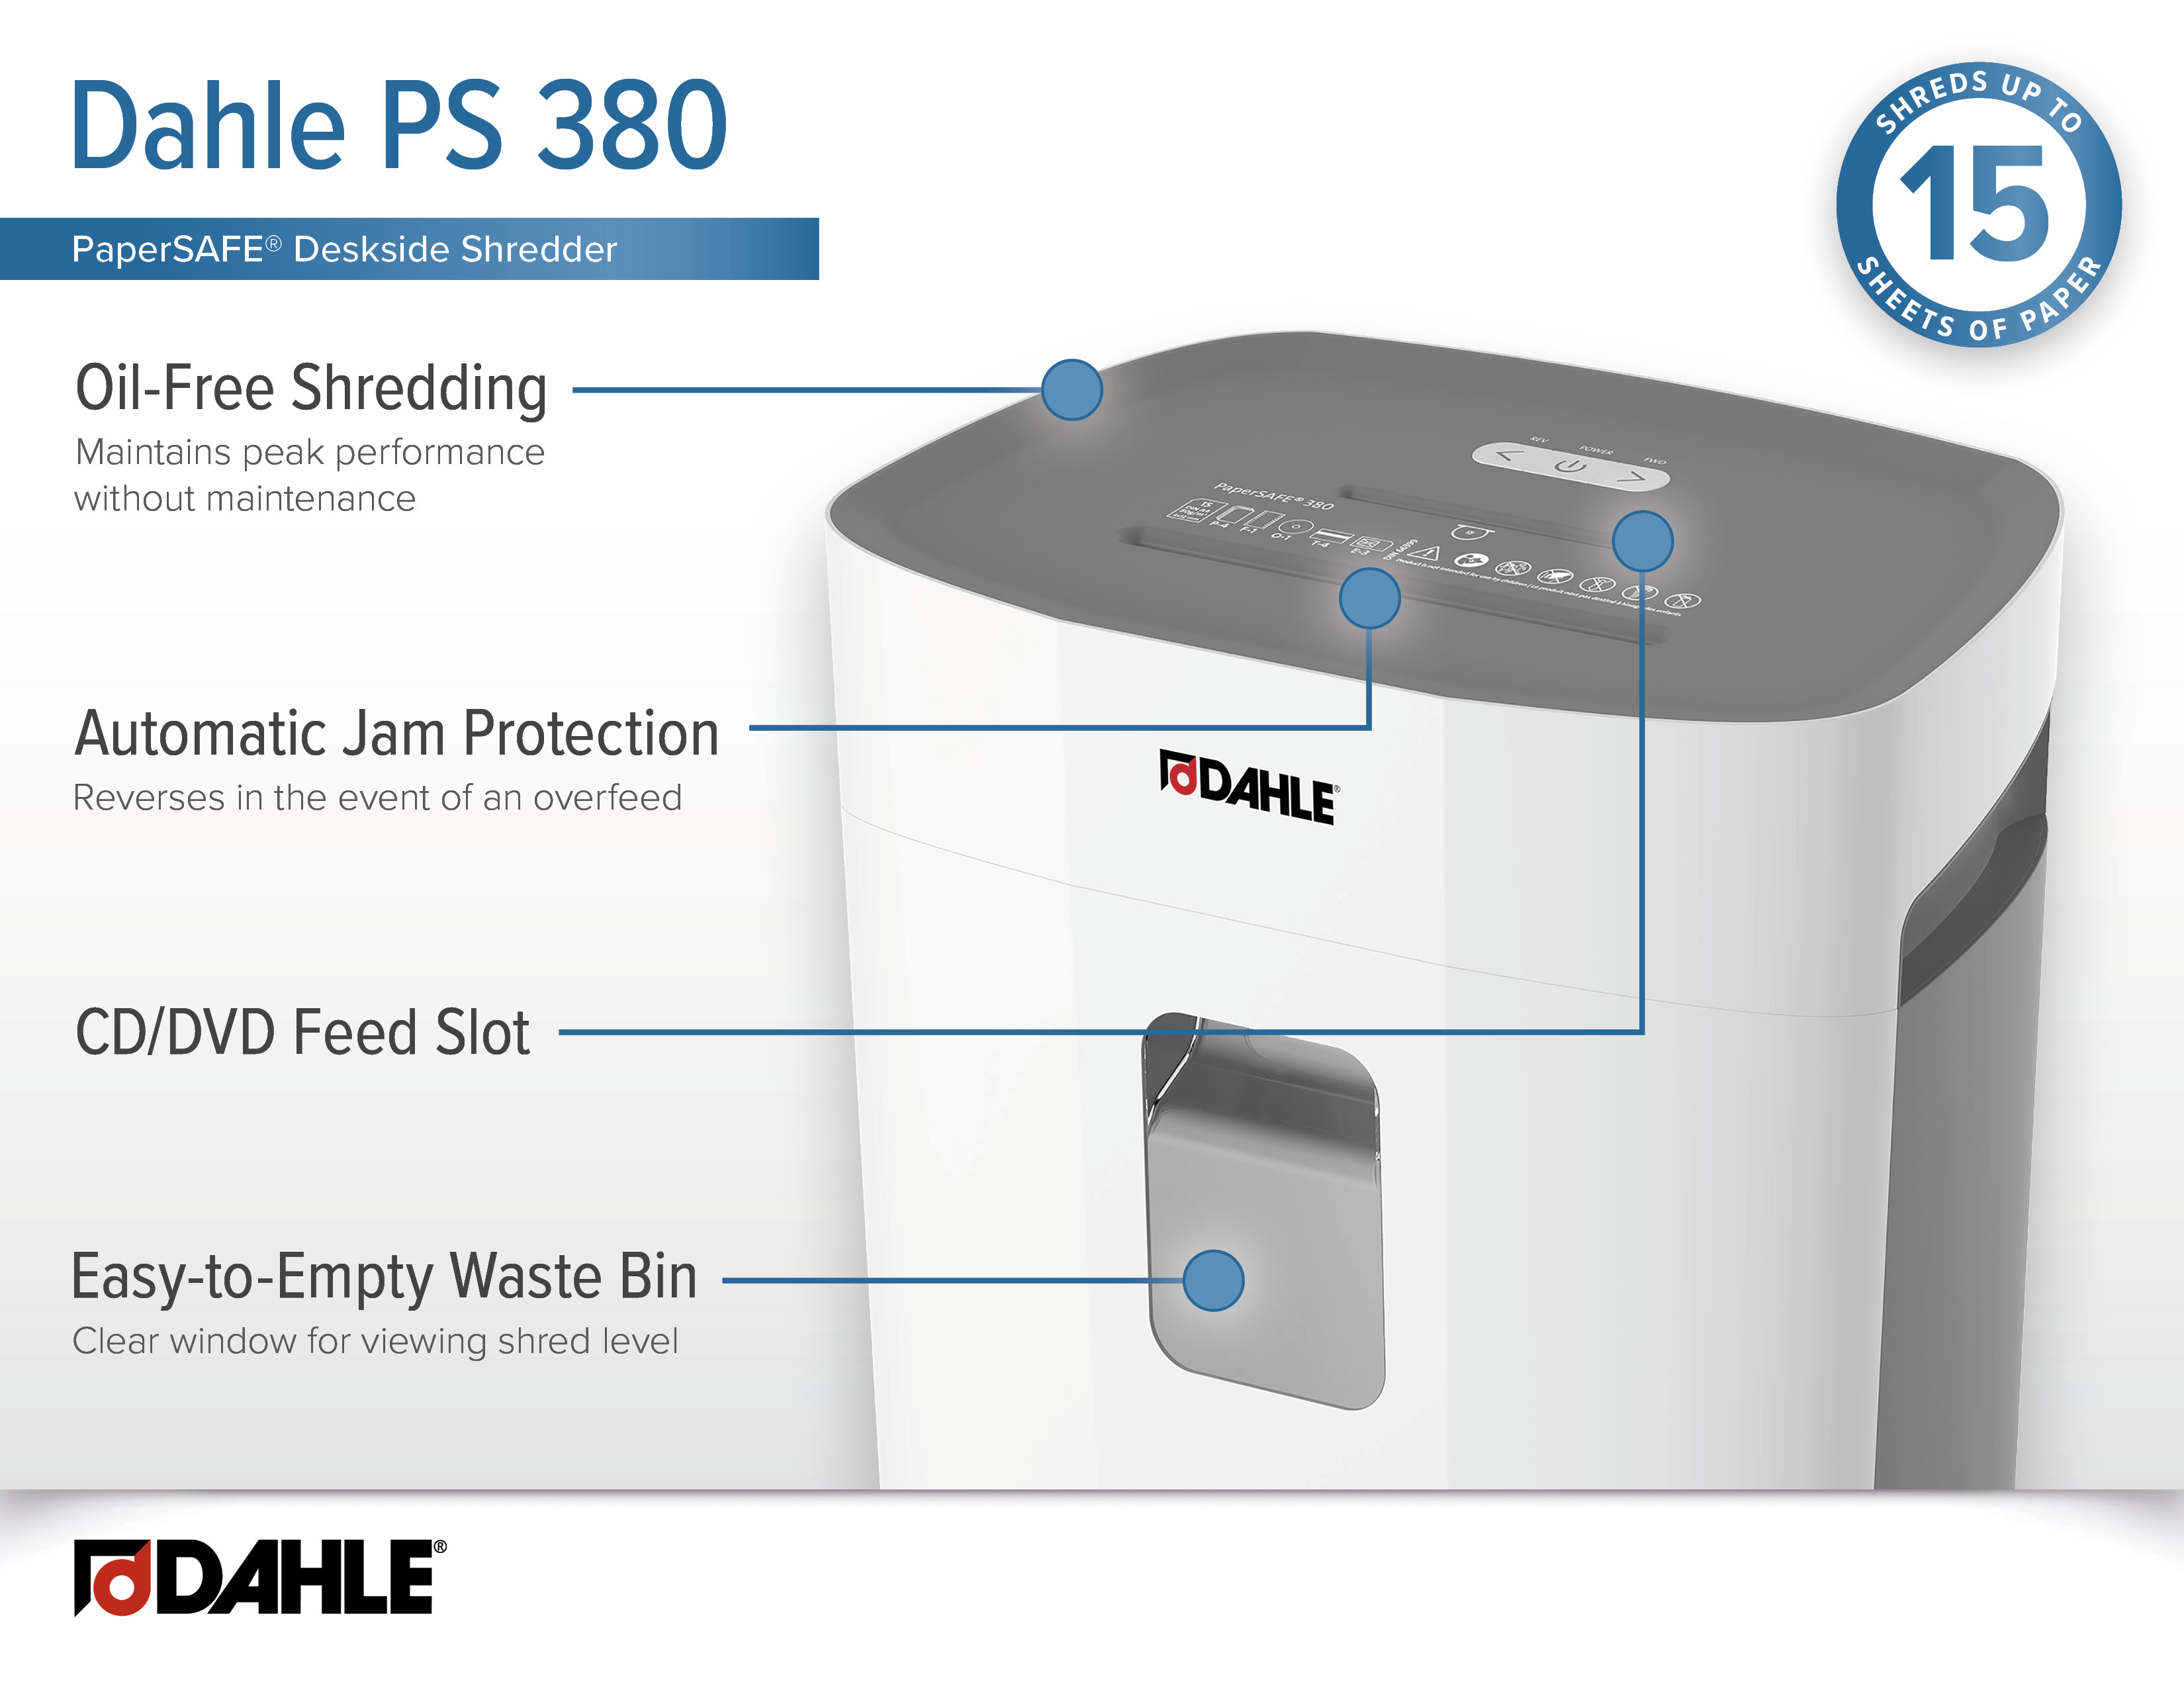 Dahle PaperSAFE 380 Infographic